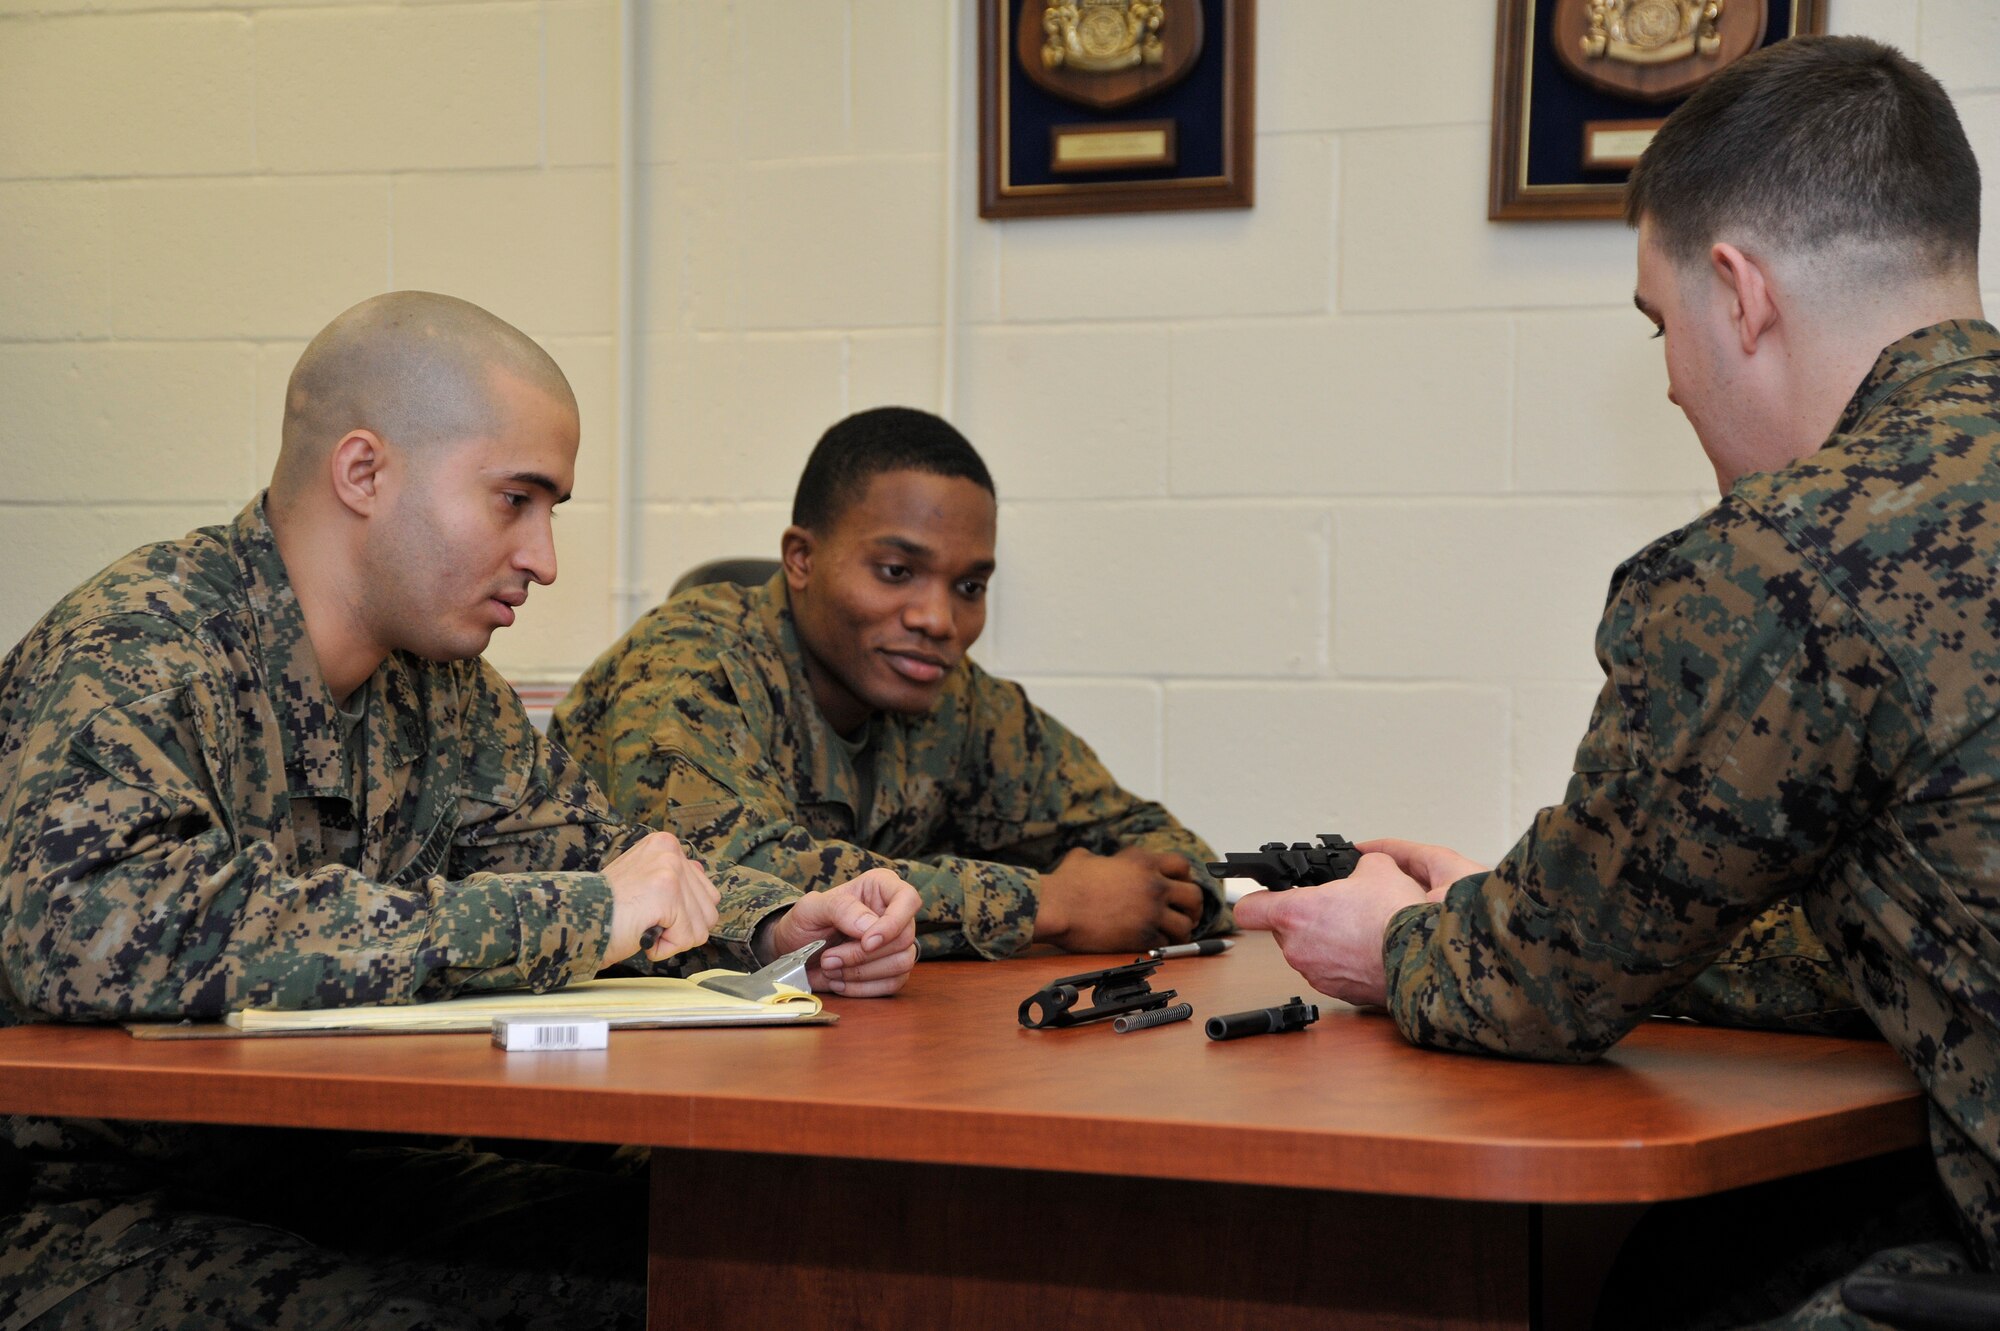 Marine Sergeant Daniel Bason, Marine Transport Squadron Andrews operations chief, refreshes Lance Corporals Samael J. FanesteEspina, and Jean Baptiste Henry, Marine Transport Squadron Andrews operations technicians, on how to field strip the Beretta M9 during their Lance Corporal’s Course here, Jan. 10. The course provides training in drill, Marine Corps history, codes of conduct, mentorship and many other classes geared toward improving the Marines before they take on the responsibility of becoming NCOs. (U.S. Air Force Photo/Senior Airman Perry Aston)